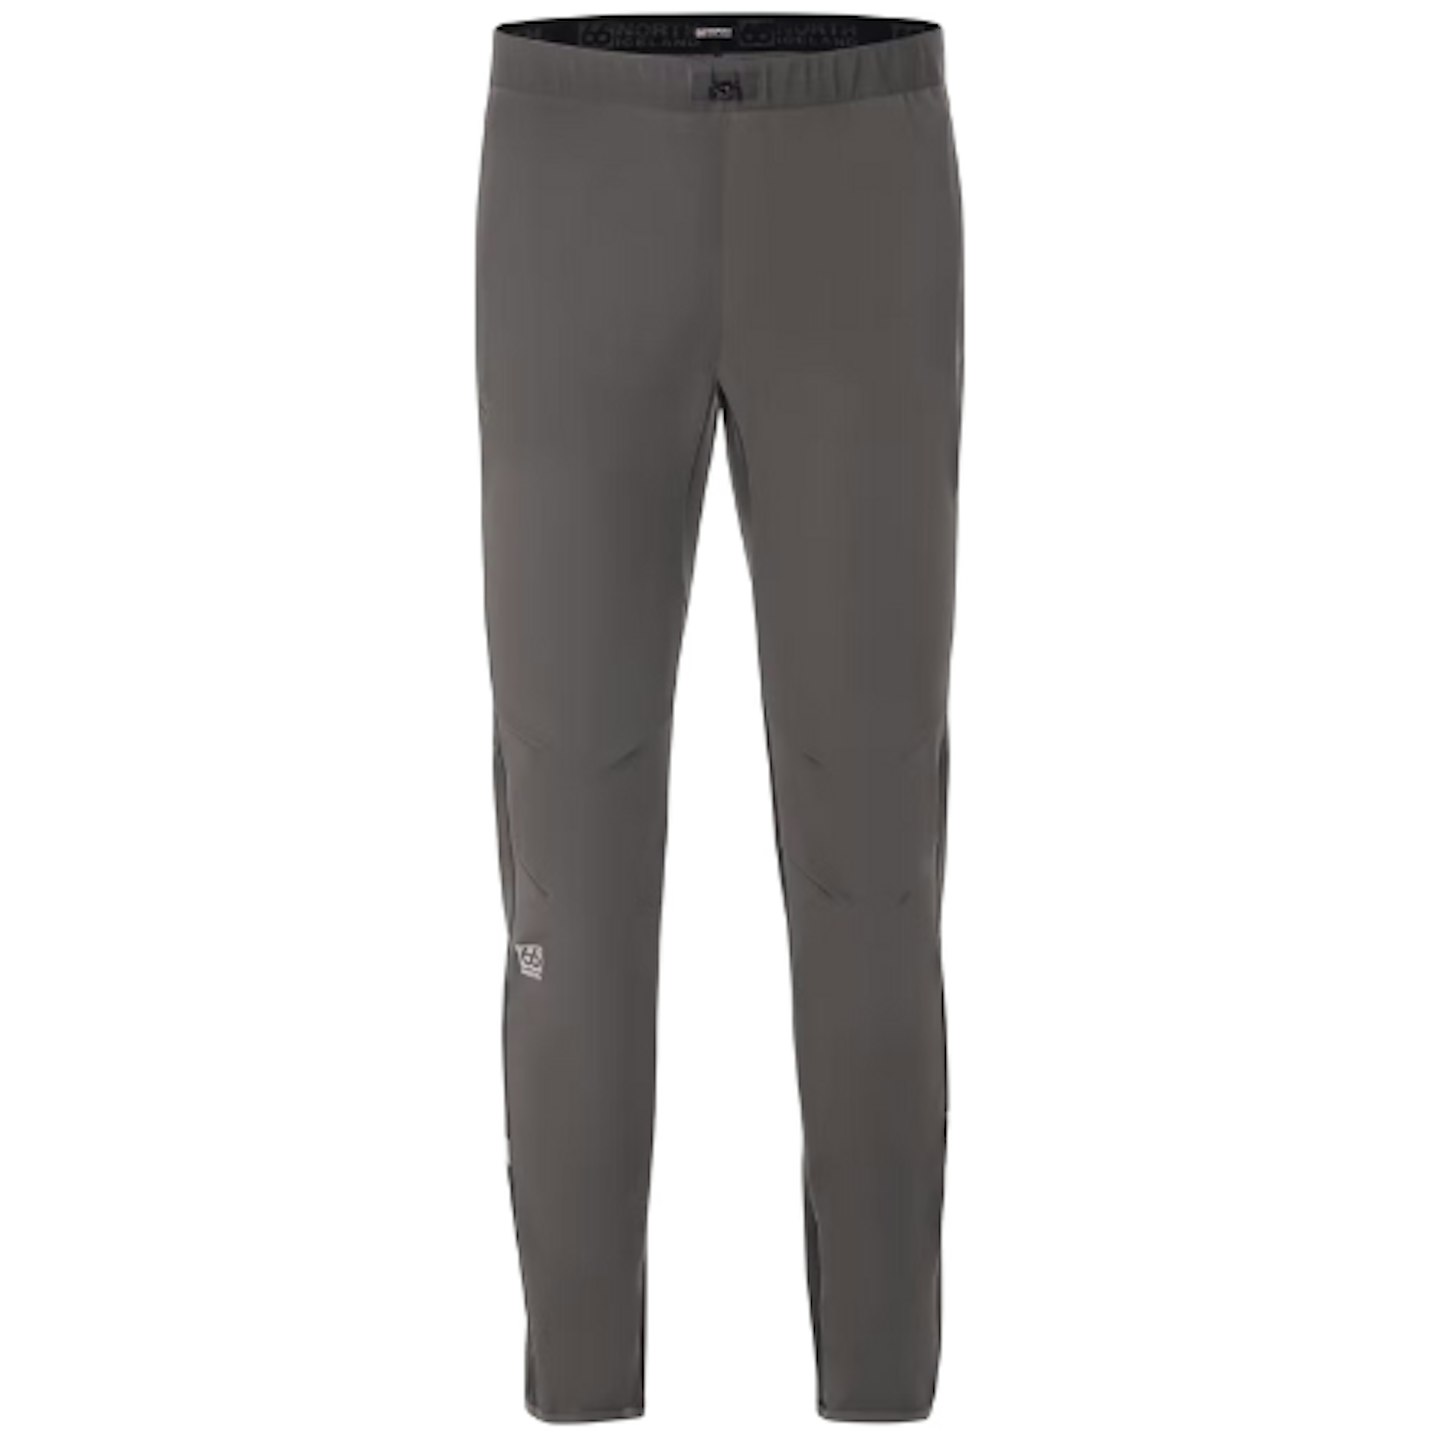 66°North Straumnes Trousers Men's